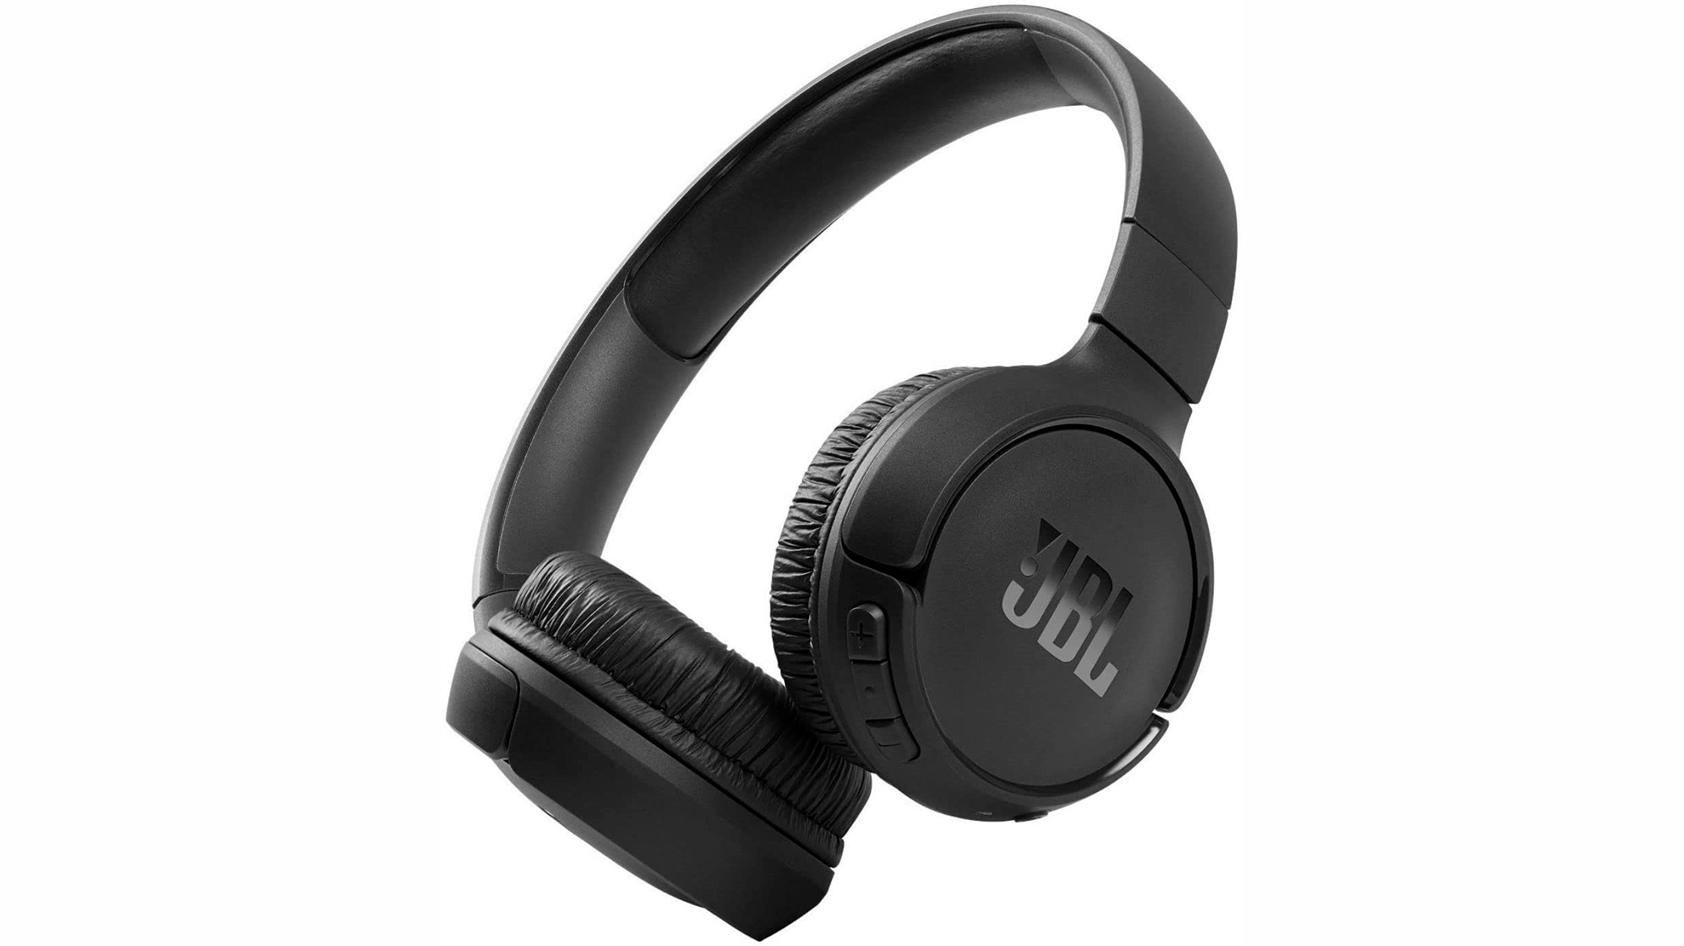 Product image for the JBL Tune 510BT.